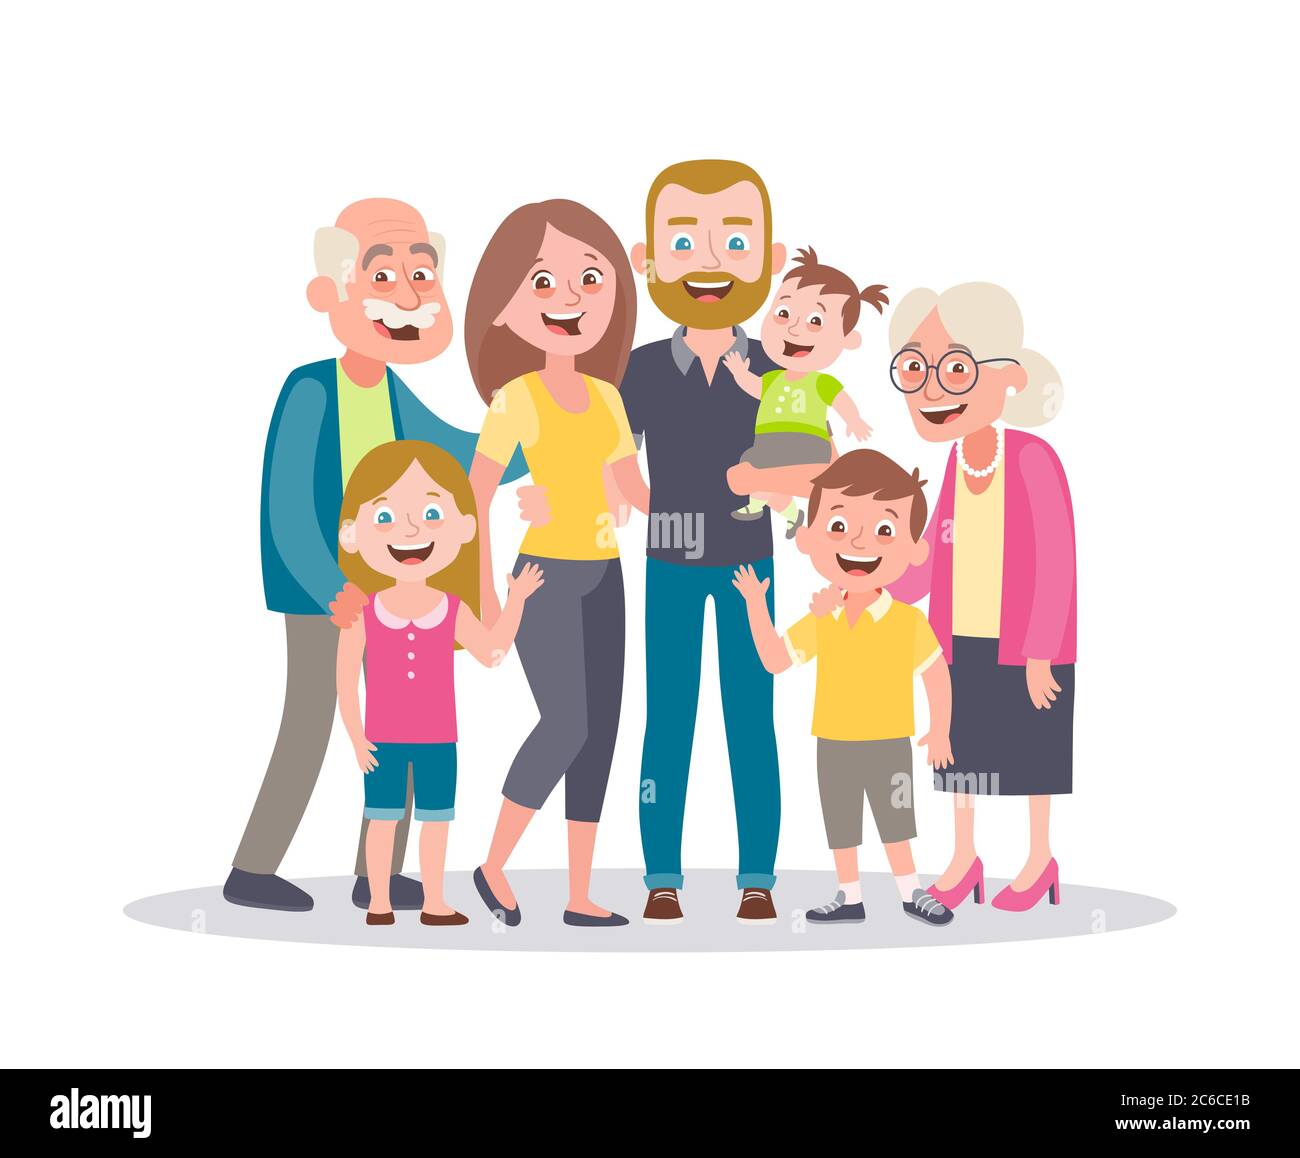 Family portrait. Parents, children and grandparents. Multi-generational family. Full lenght portrait of family members standing together. Vector illus Stock Vector